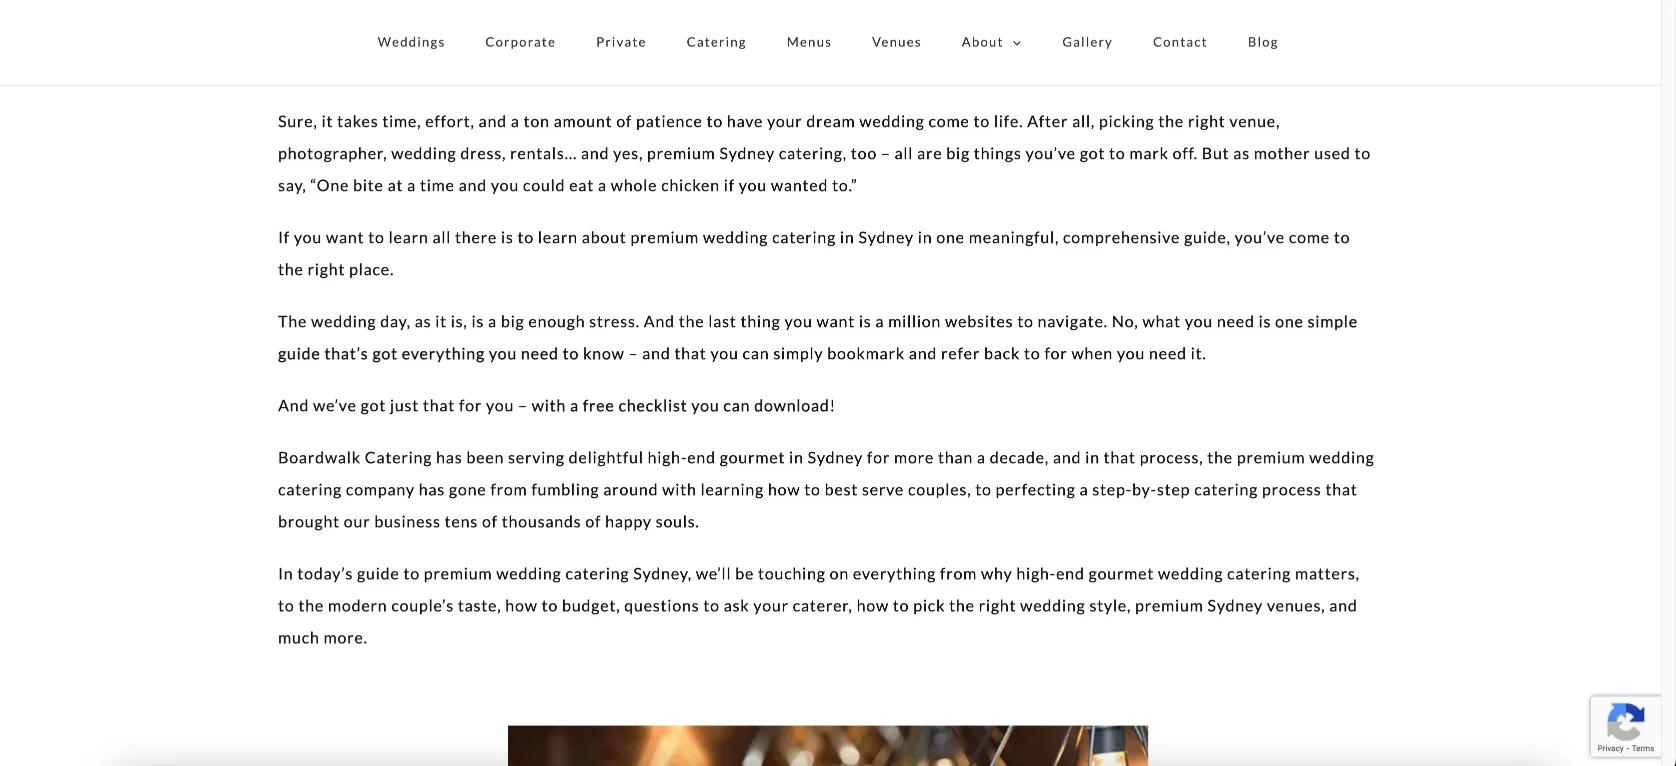 comprehensive guides, long-form guide, catering, content catering, boardwalk catering